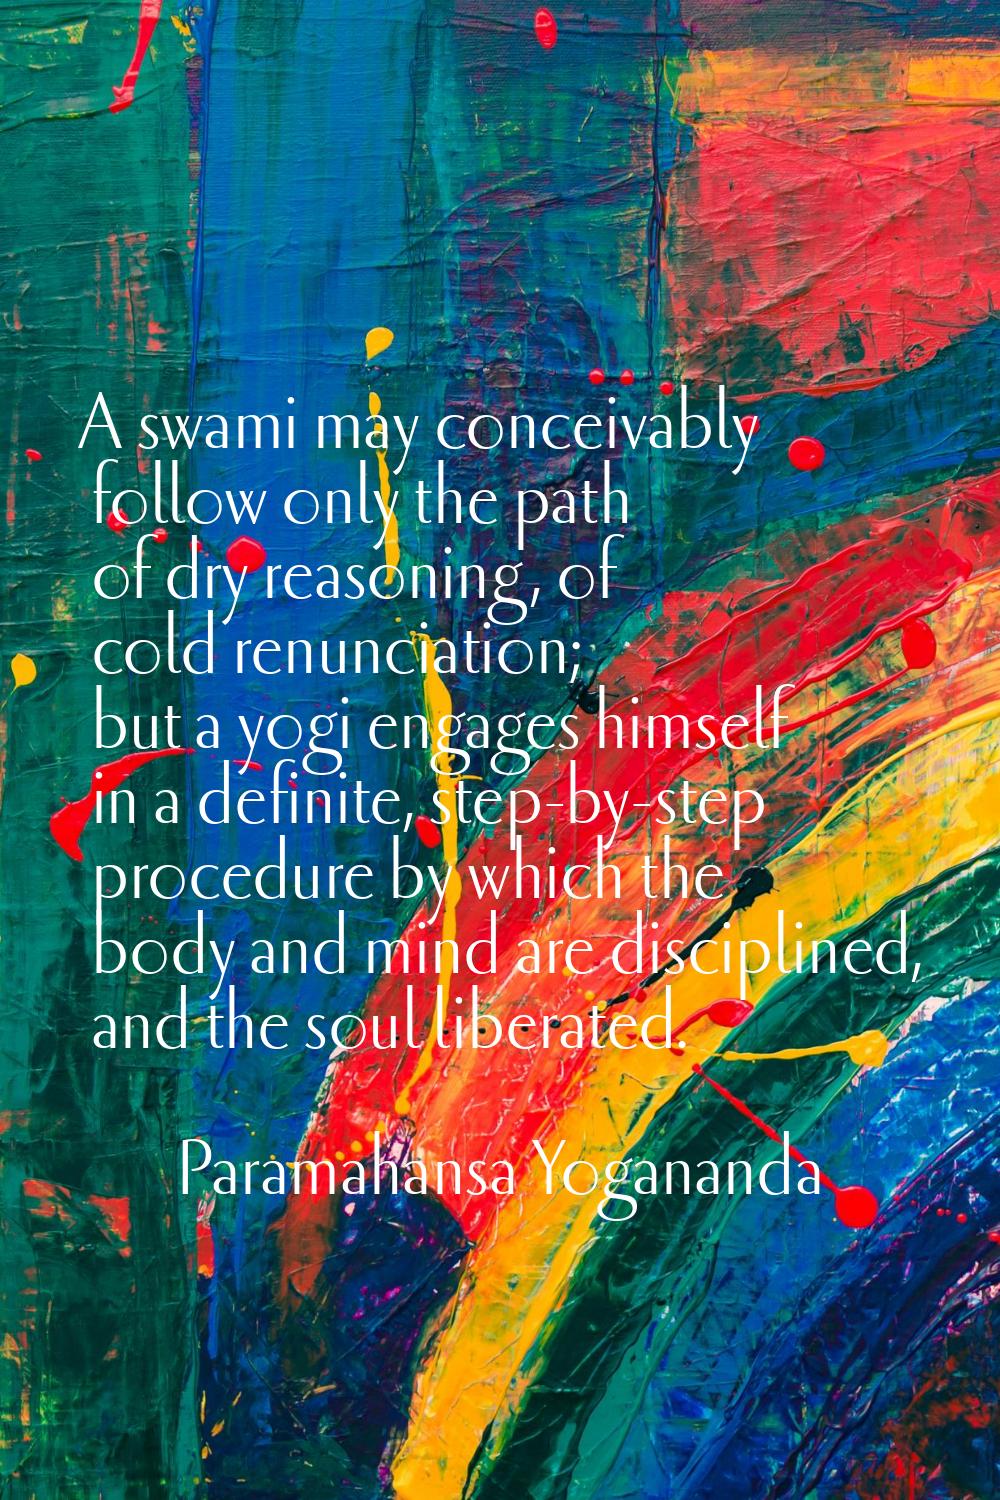 A swami may conceivably follow only the path of dry reasoning, of cold renunciation; but a yogi eng